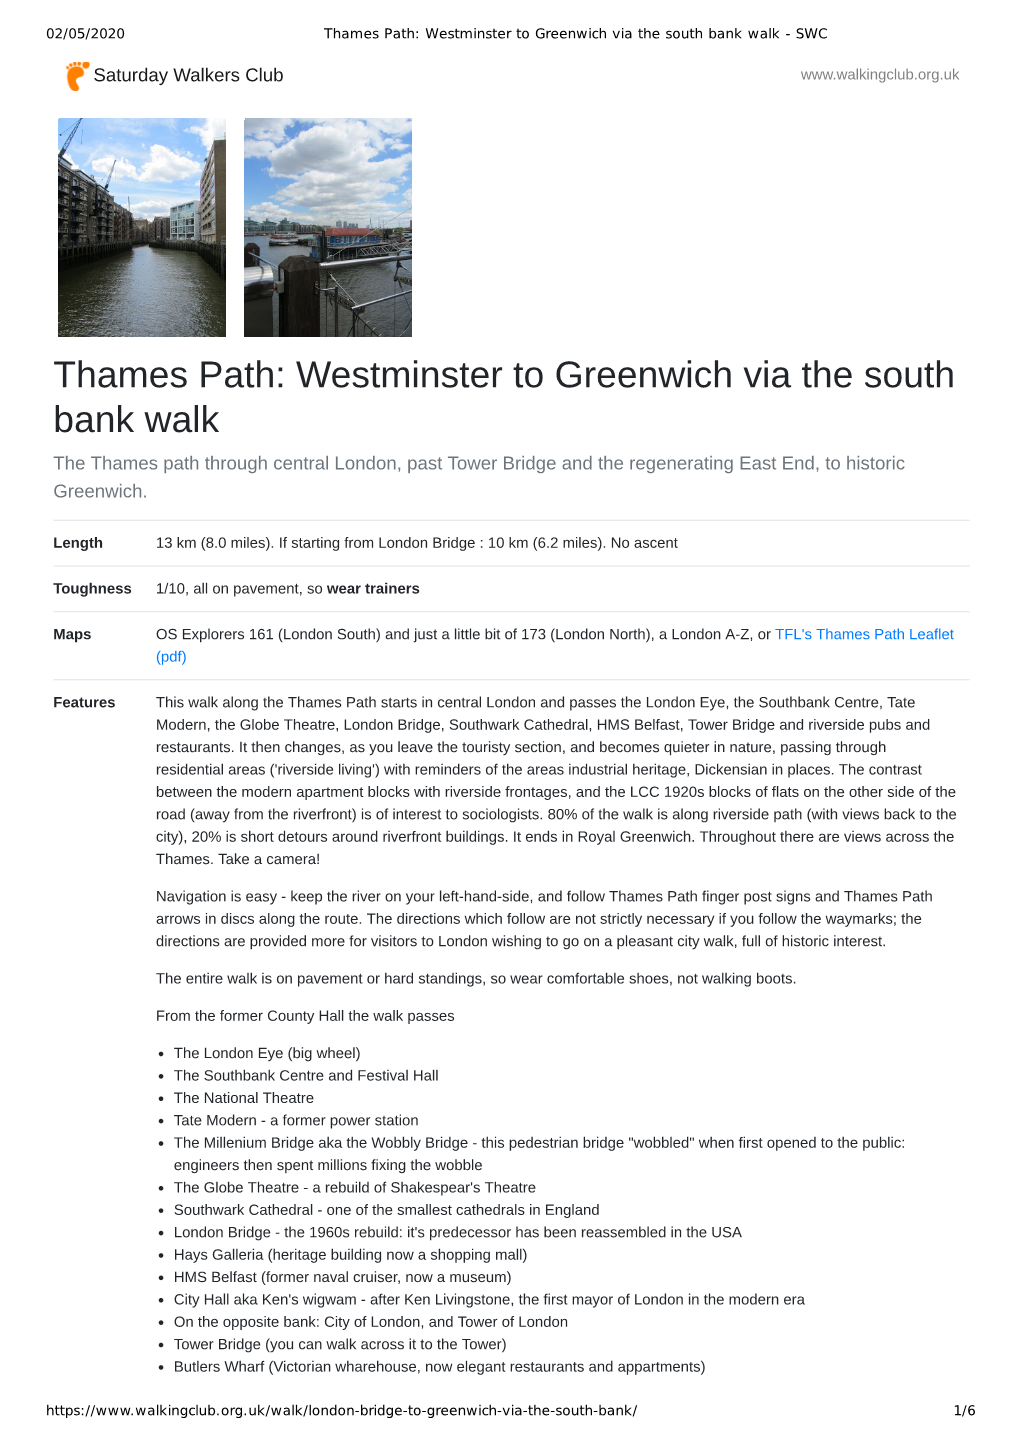 Thames Path: Westminster to Greenwich Via the South Bank Walk - SWC